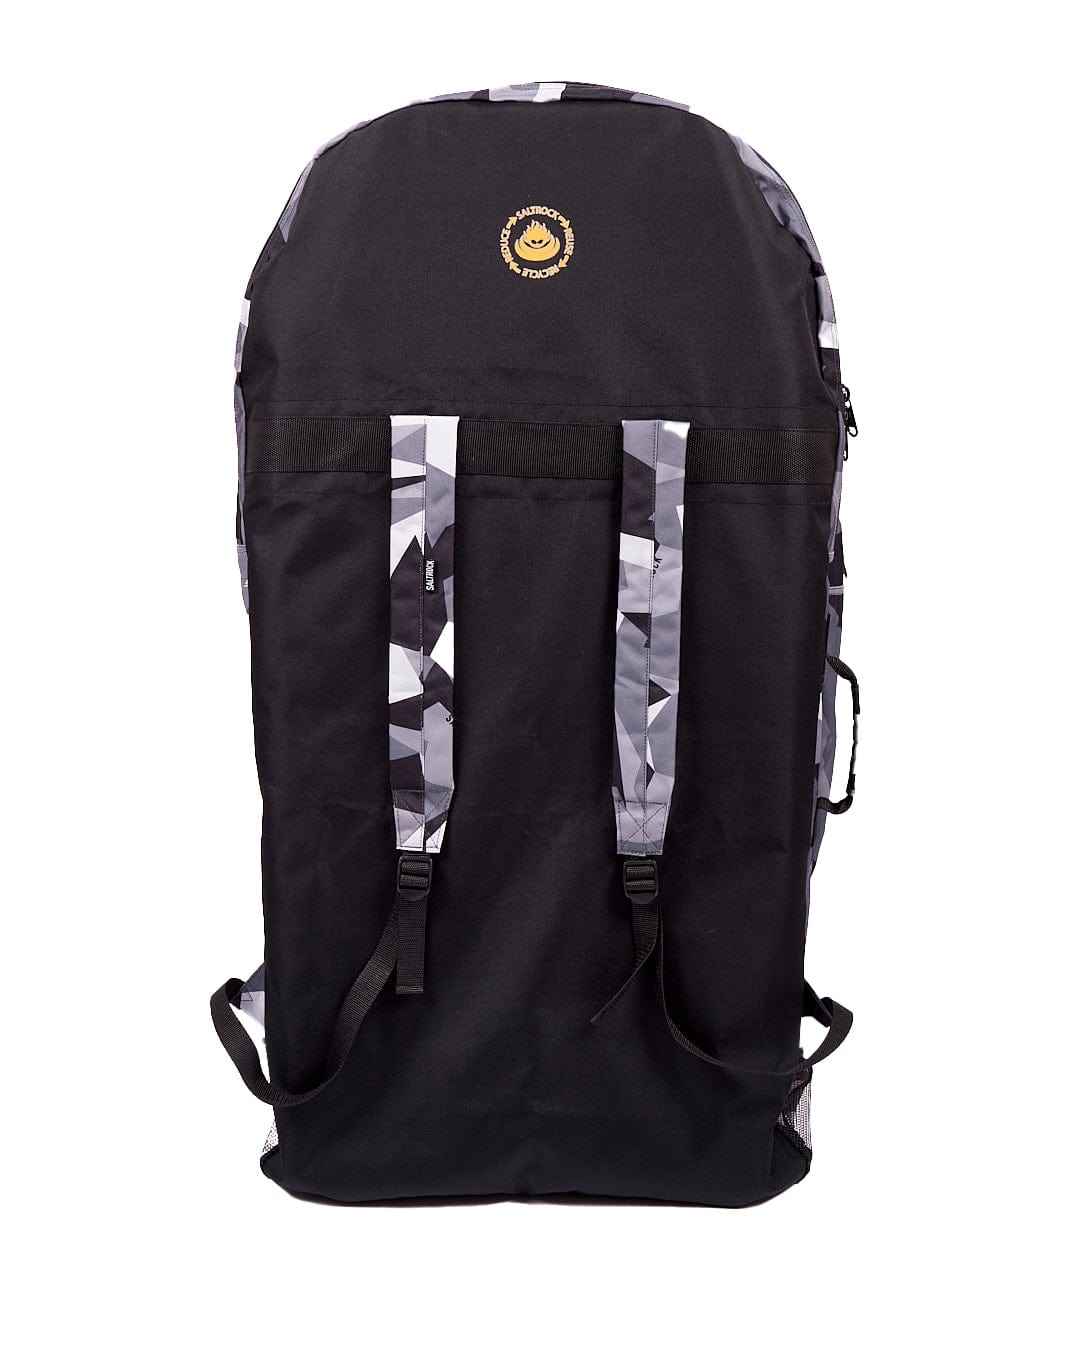 A black and white backpack with a camouflage pattern. This Camo Core - Double Bodyboard Bag - Dark Grey features adjustable padded straps for added comfort.